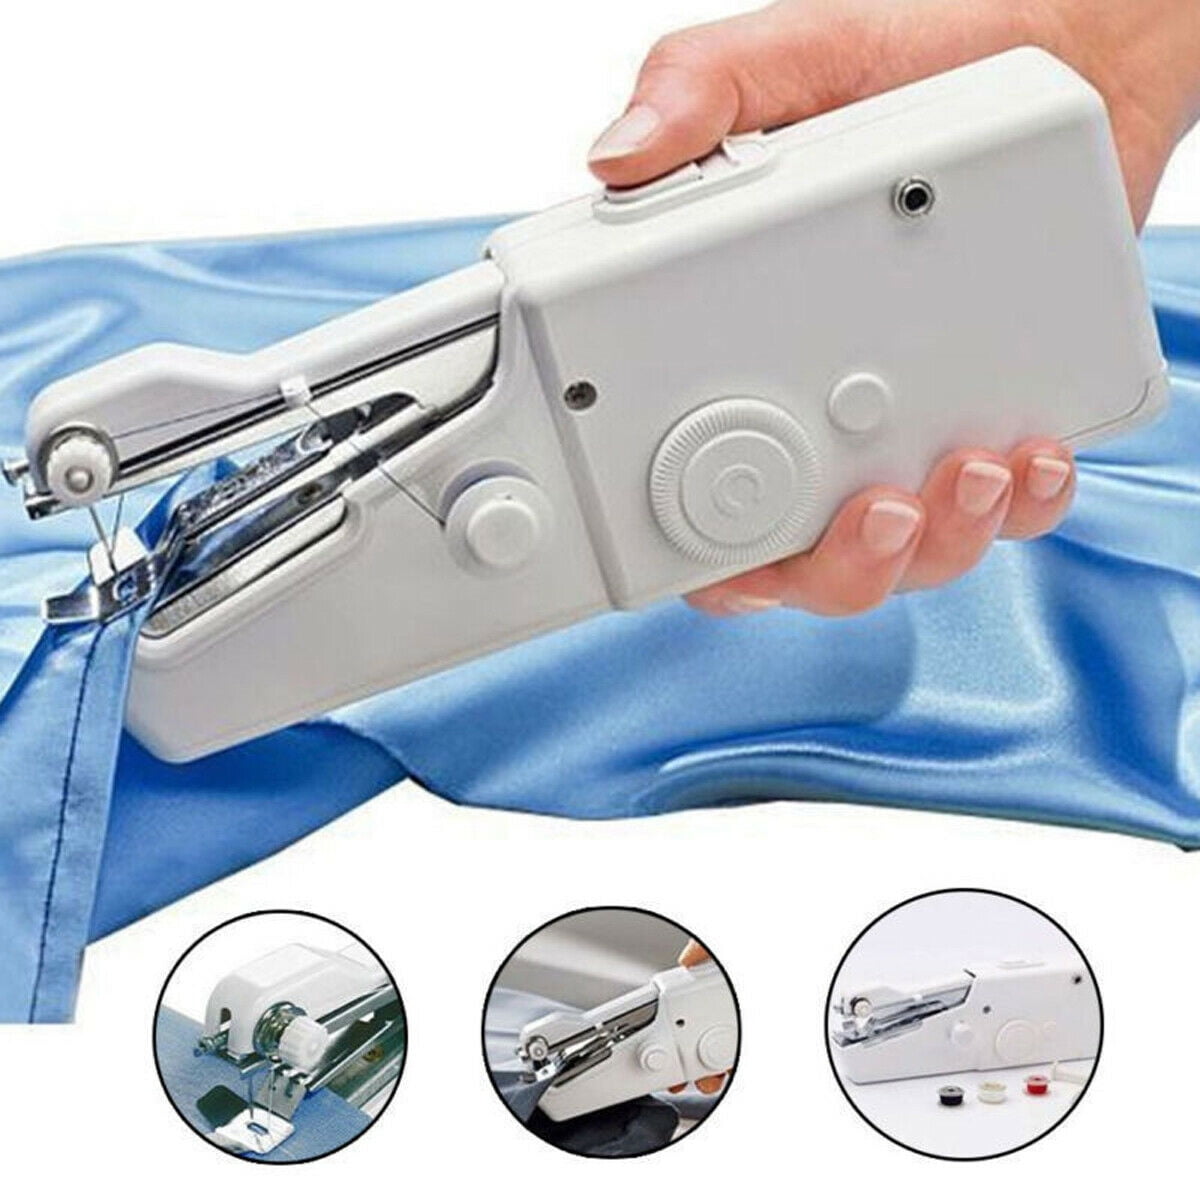 Mini Portable Household Handy Stitch Electric Handheld Sewing Machine Tailor Hom 